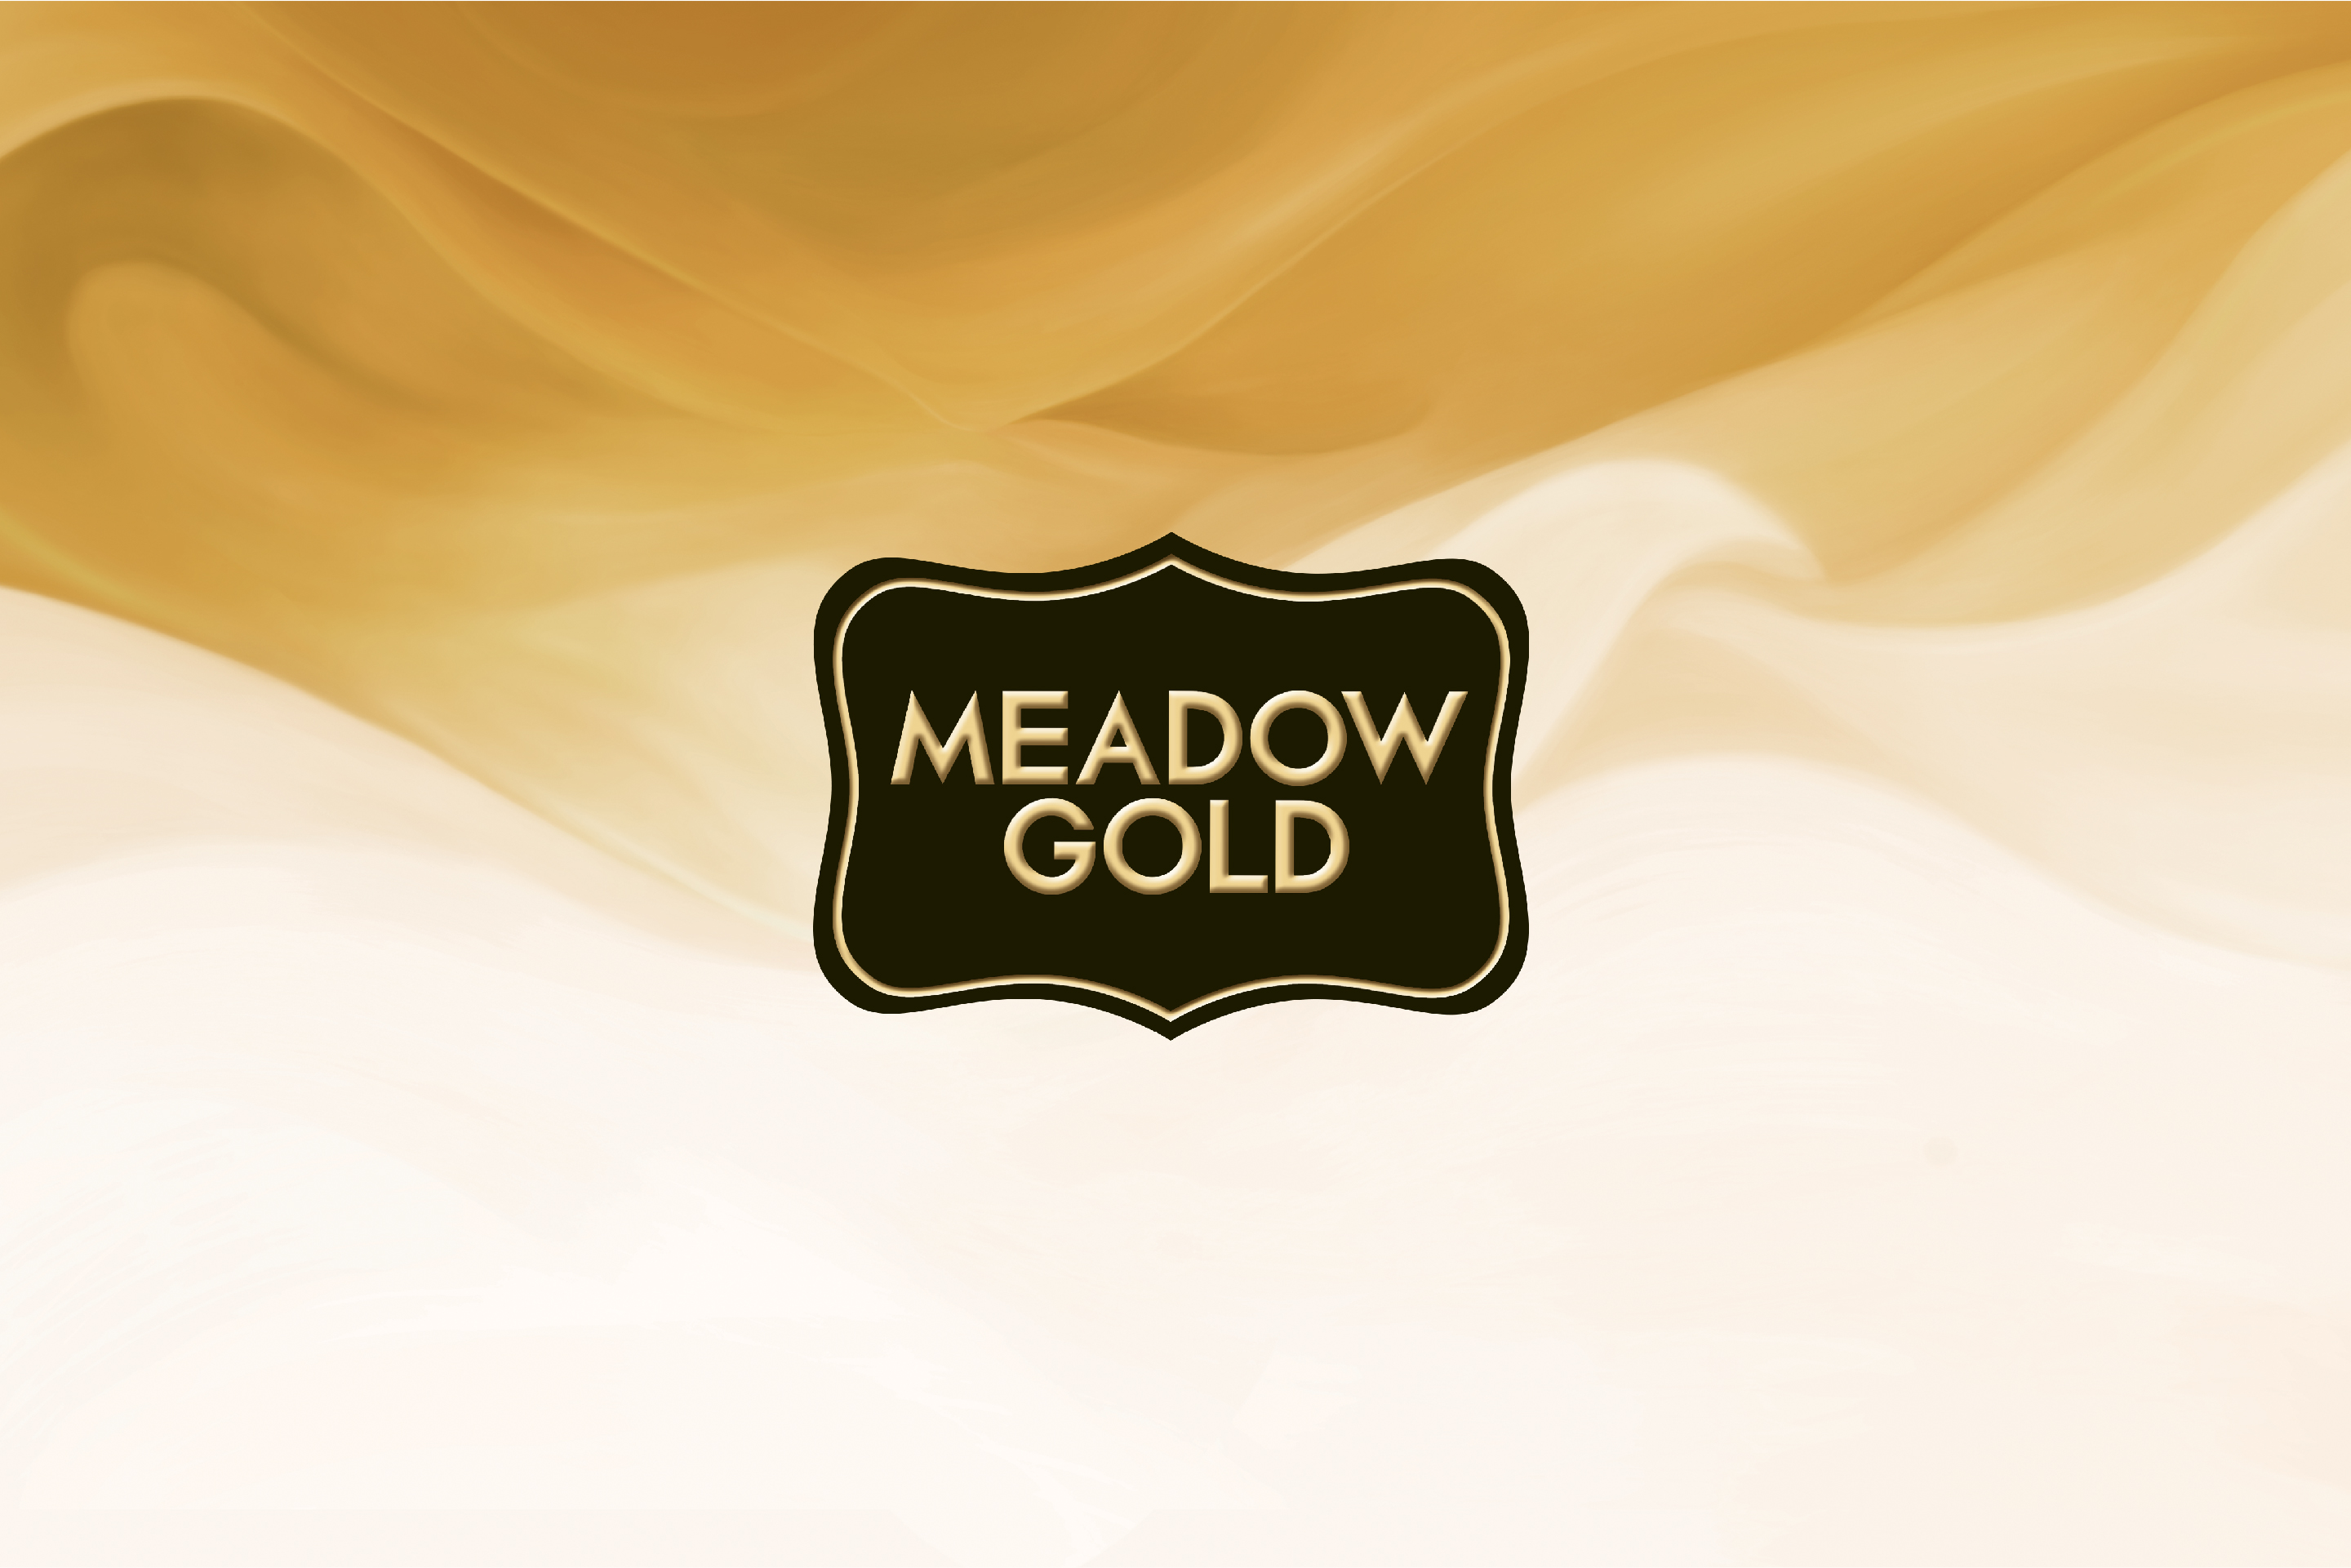 Meadow Gold Ice Cream Packaging - Malaysia